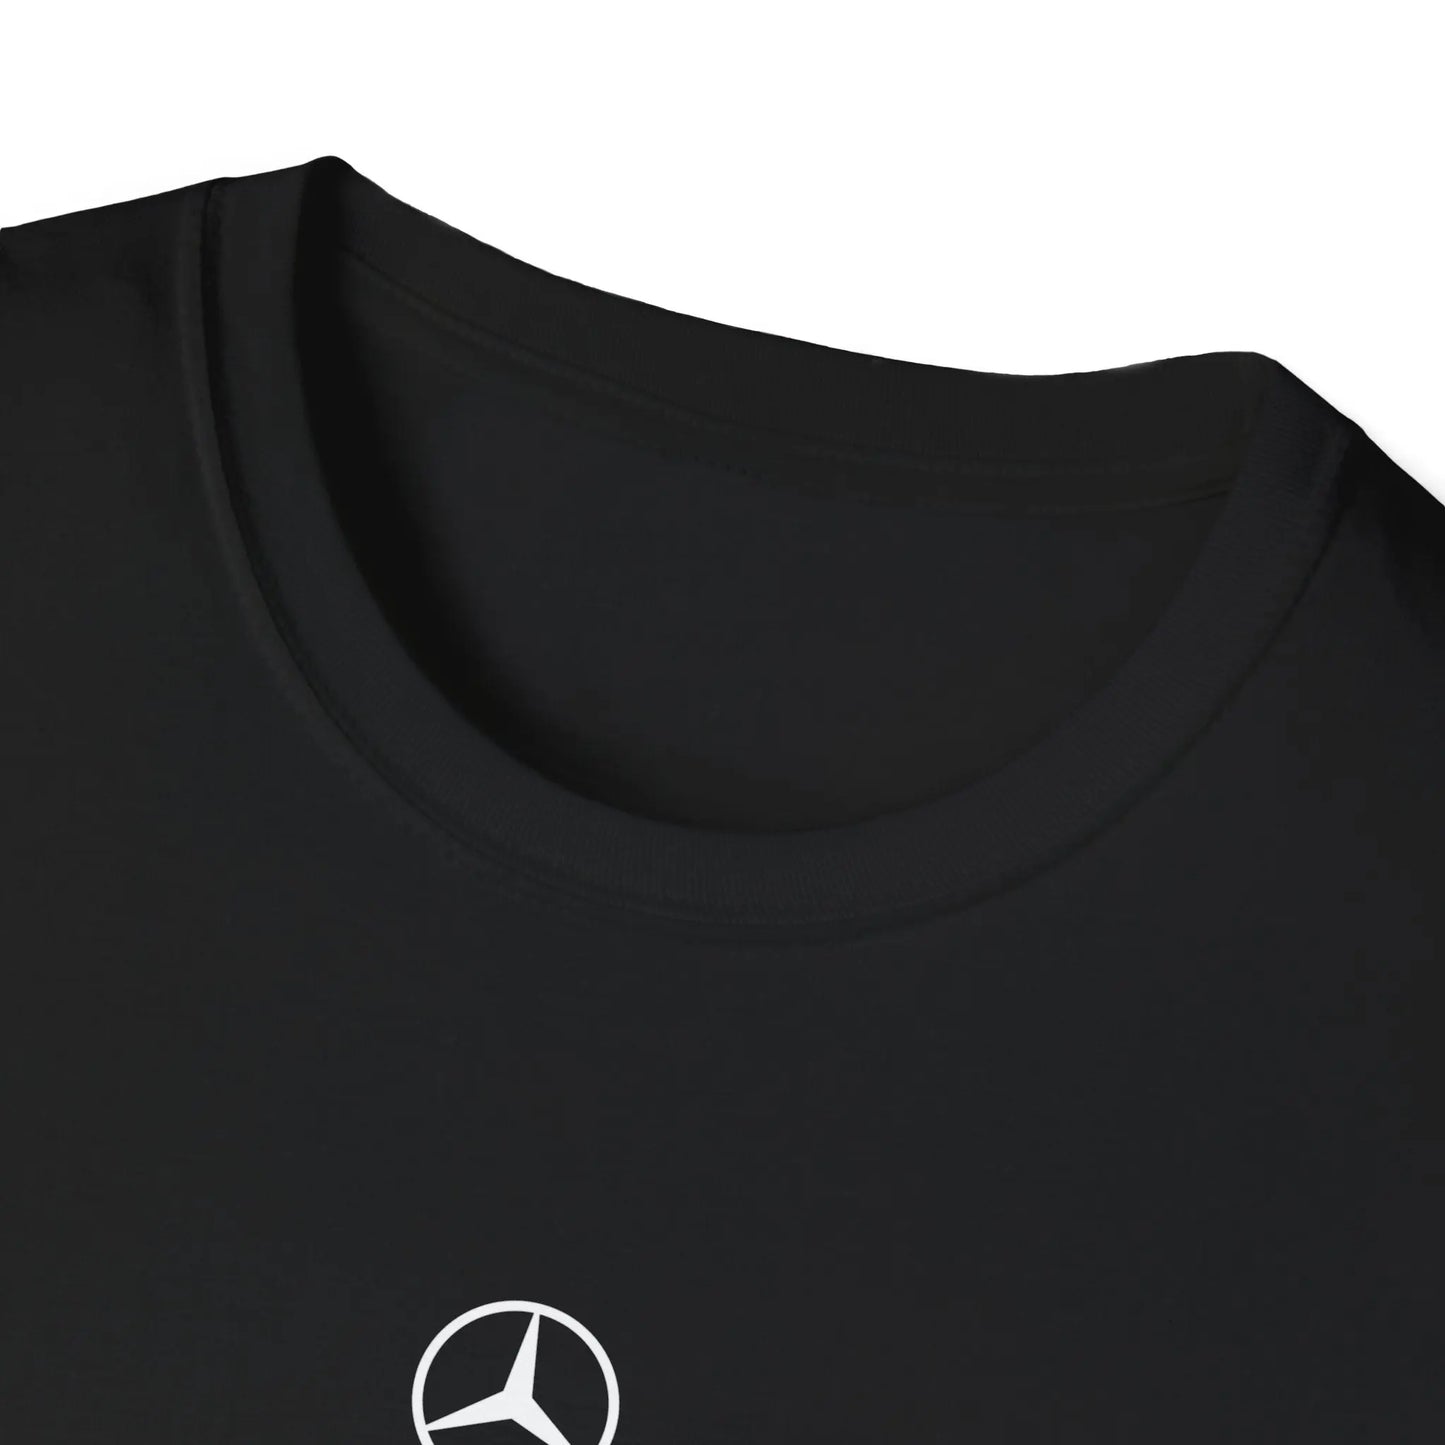 Mercedes GLE Coupe On the Road: Black T-Shirt for Automotive Enthusiasts! - Black Threadz